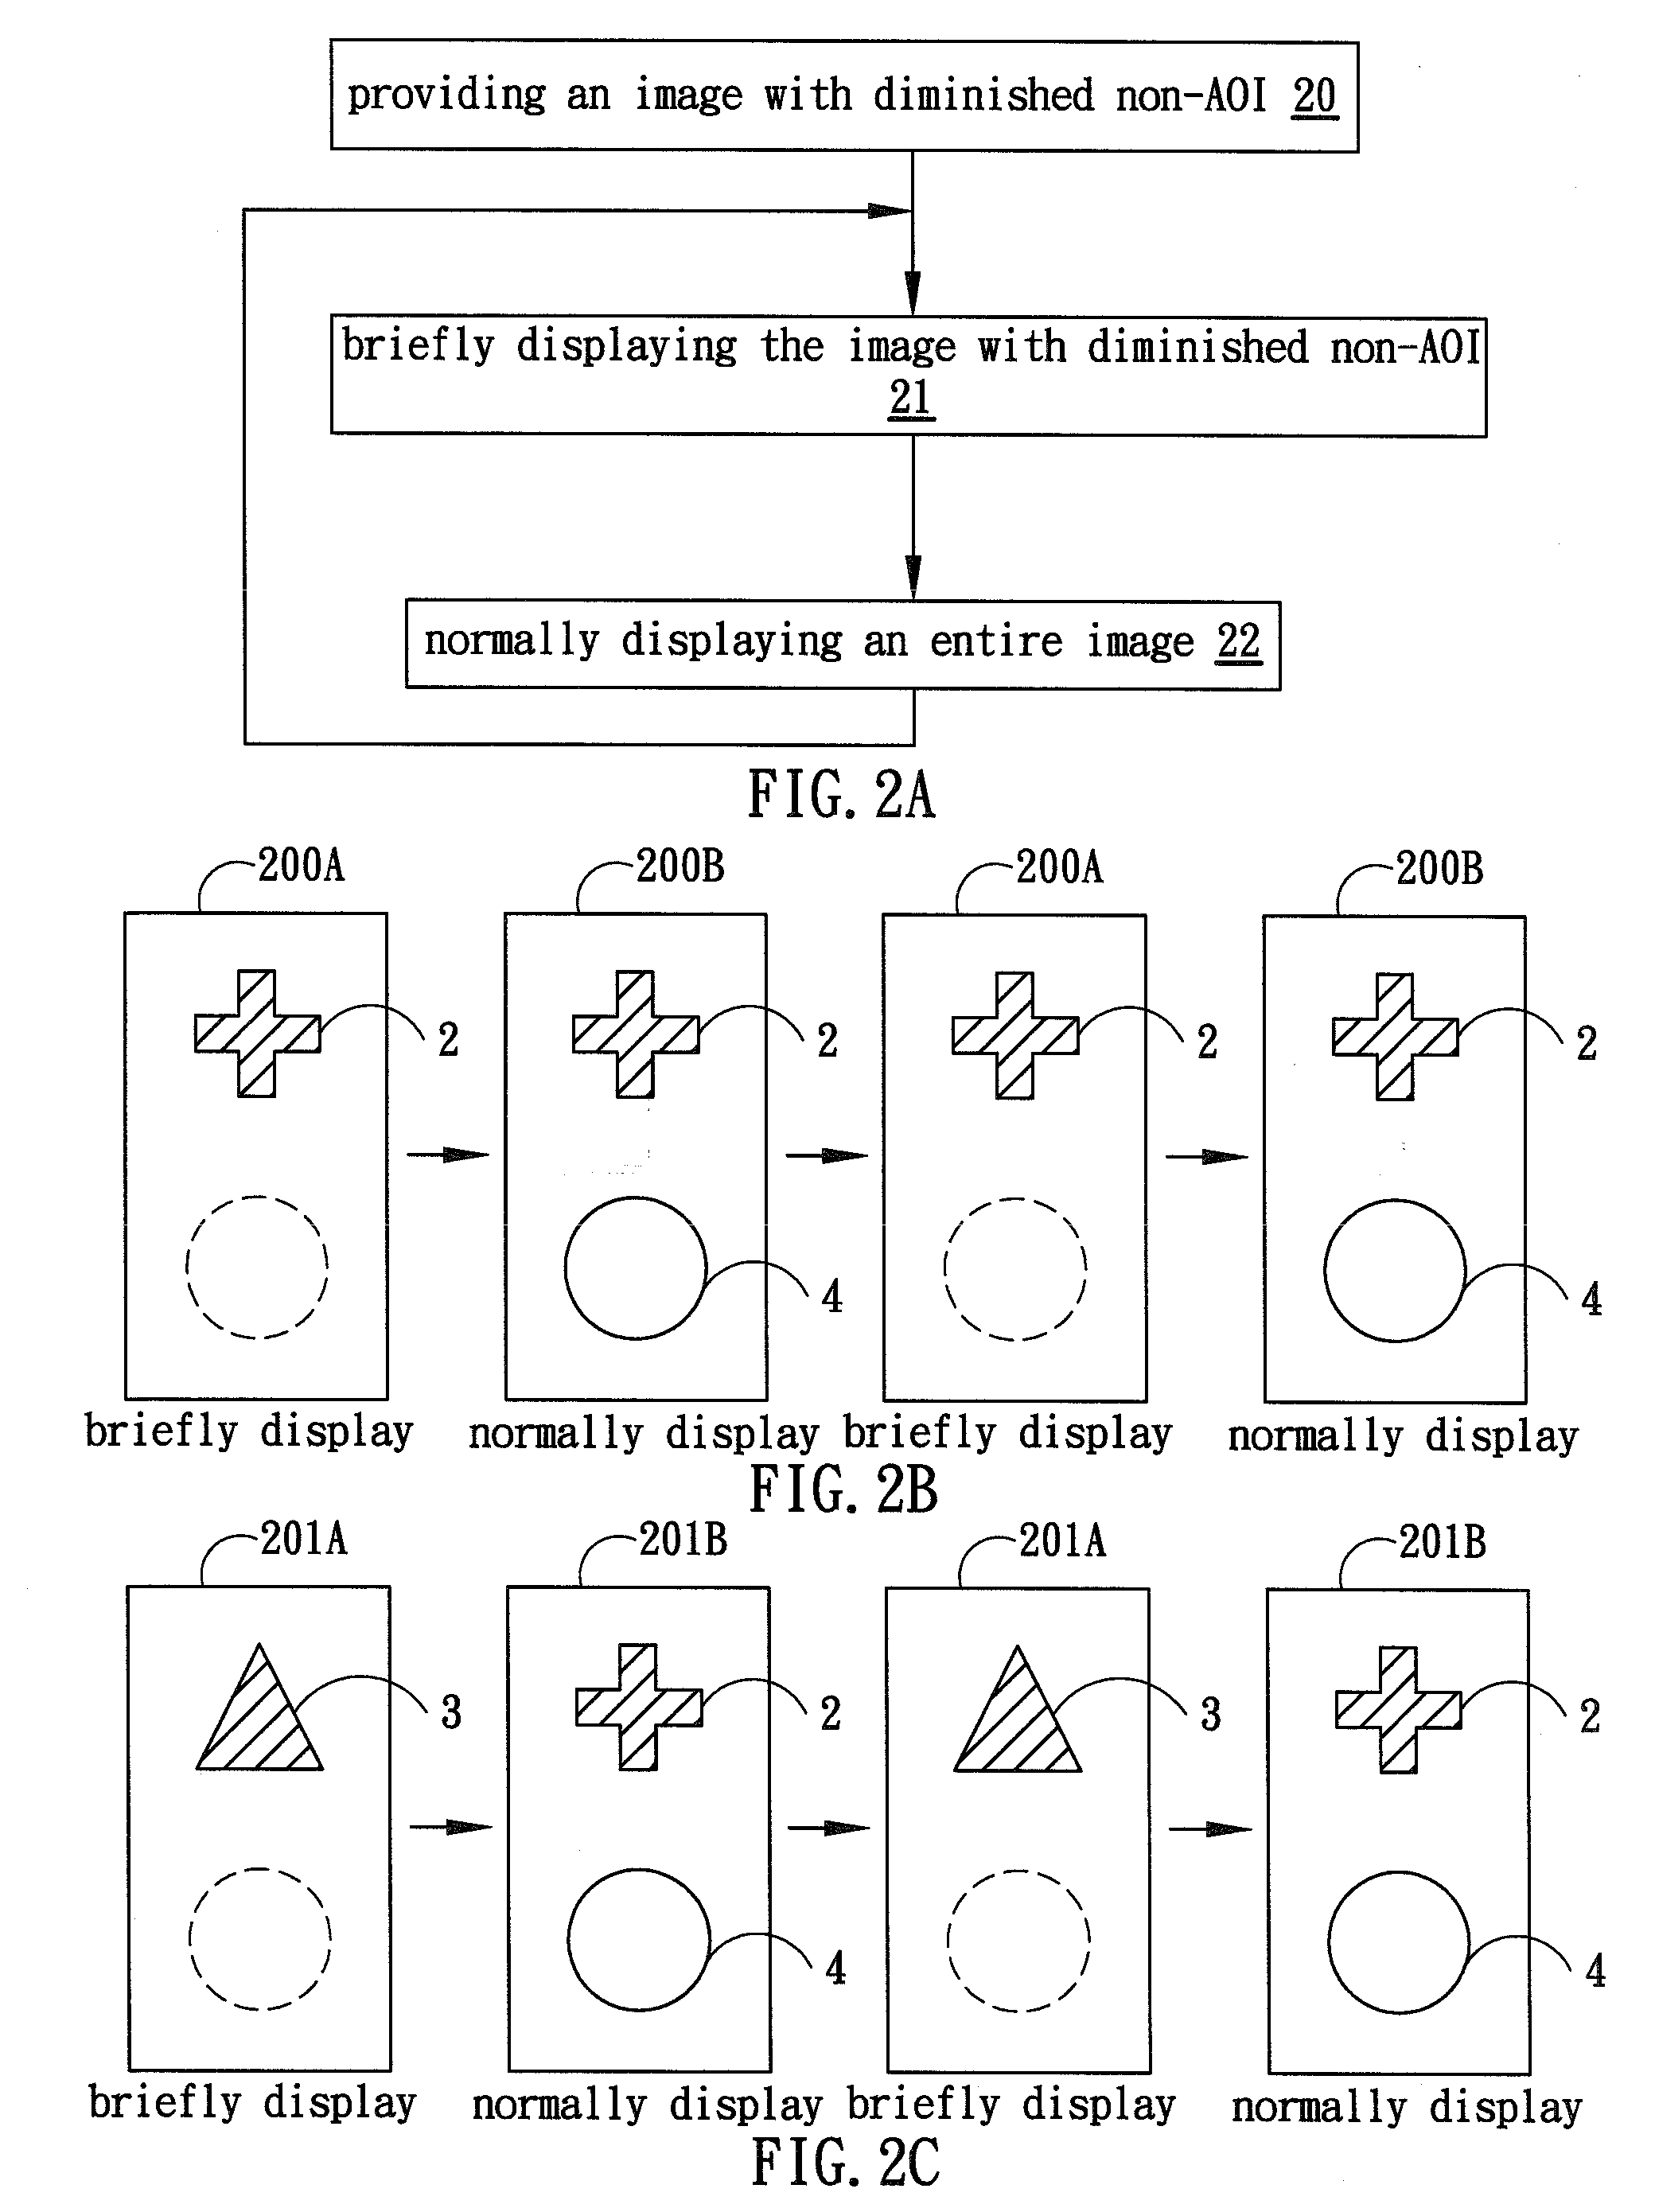 Method of Directing a Viewer's Attention Subliminally in Image Display